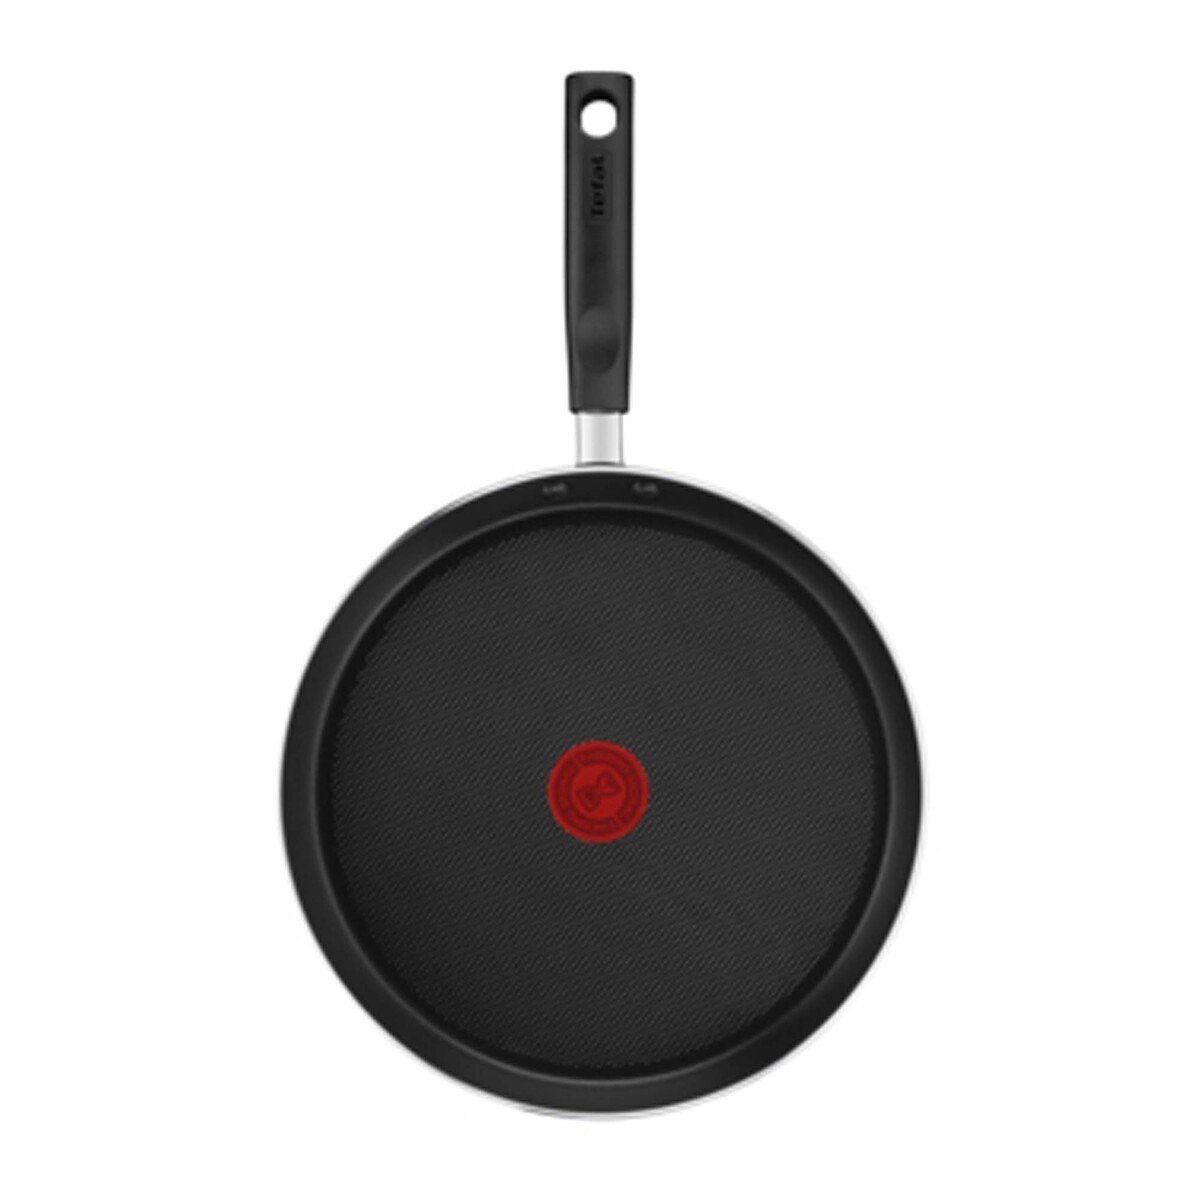 Tefal G6 Delicia Tawa + Delicia Sauce Pan With Glass Lid, 28+16 cm, Black